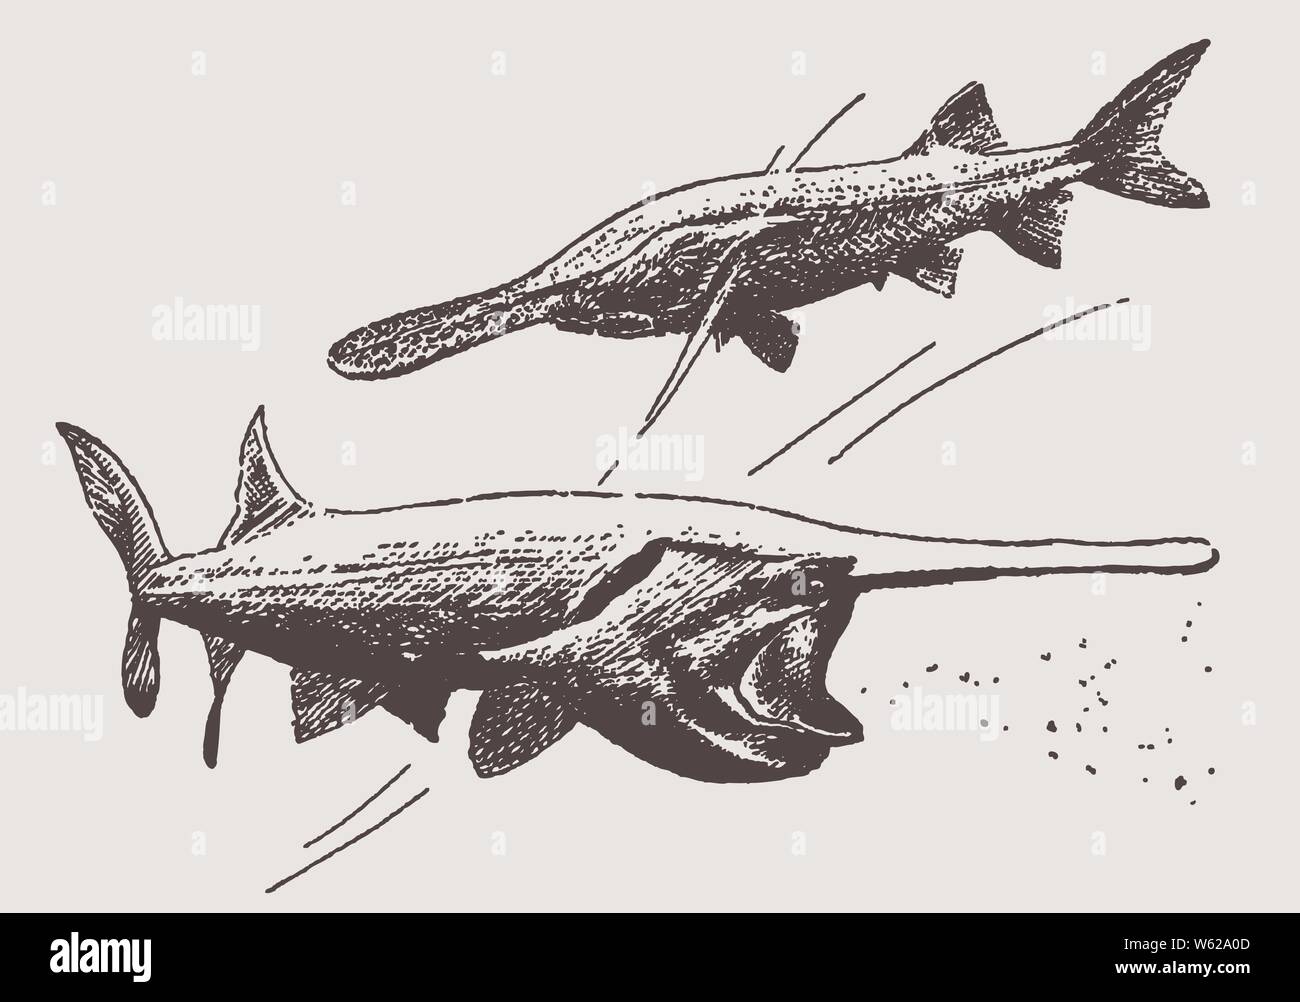 American paddlefish (polyodon spathula) swimming with wide open mouth, in order to eat zooplankton. Illustration after a historic engraving, early 20c Stock Vector